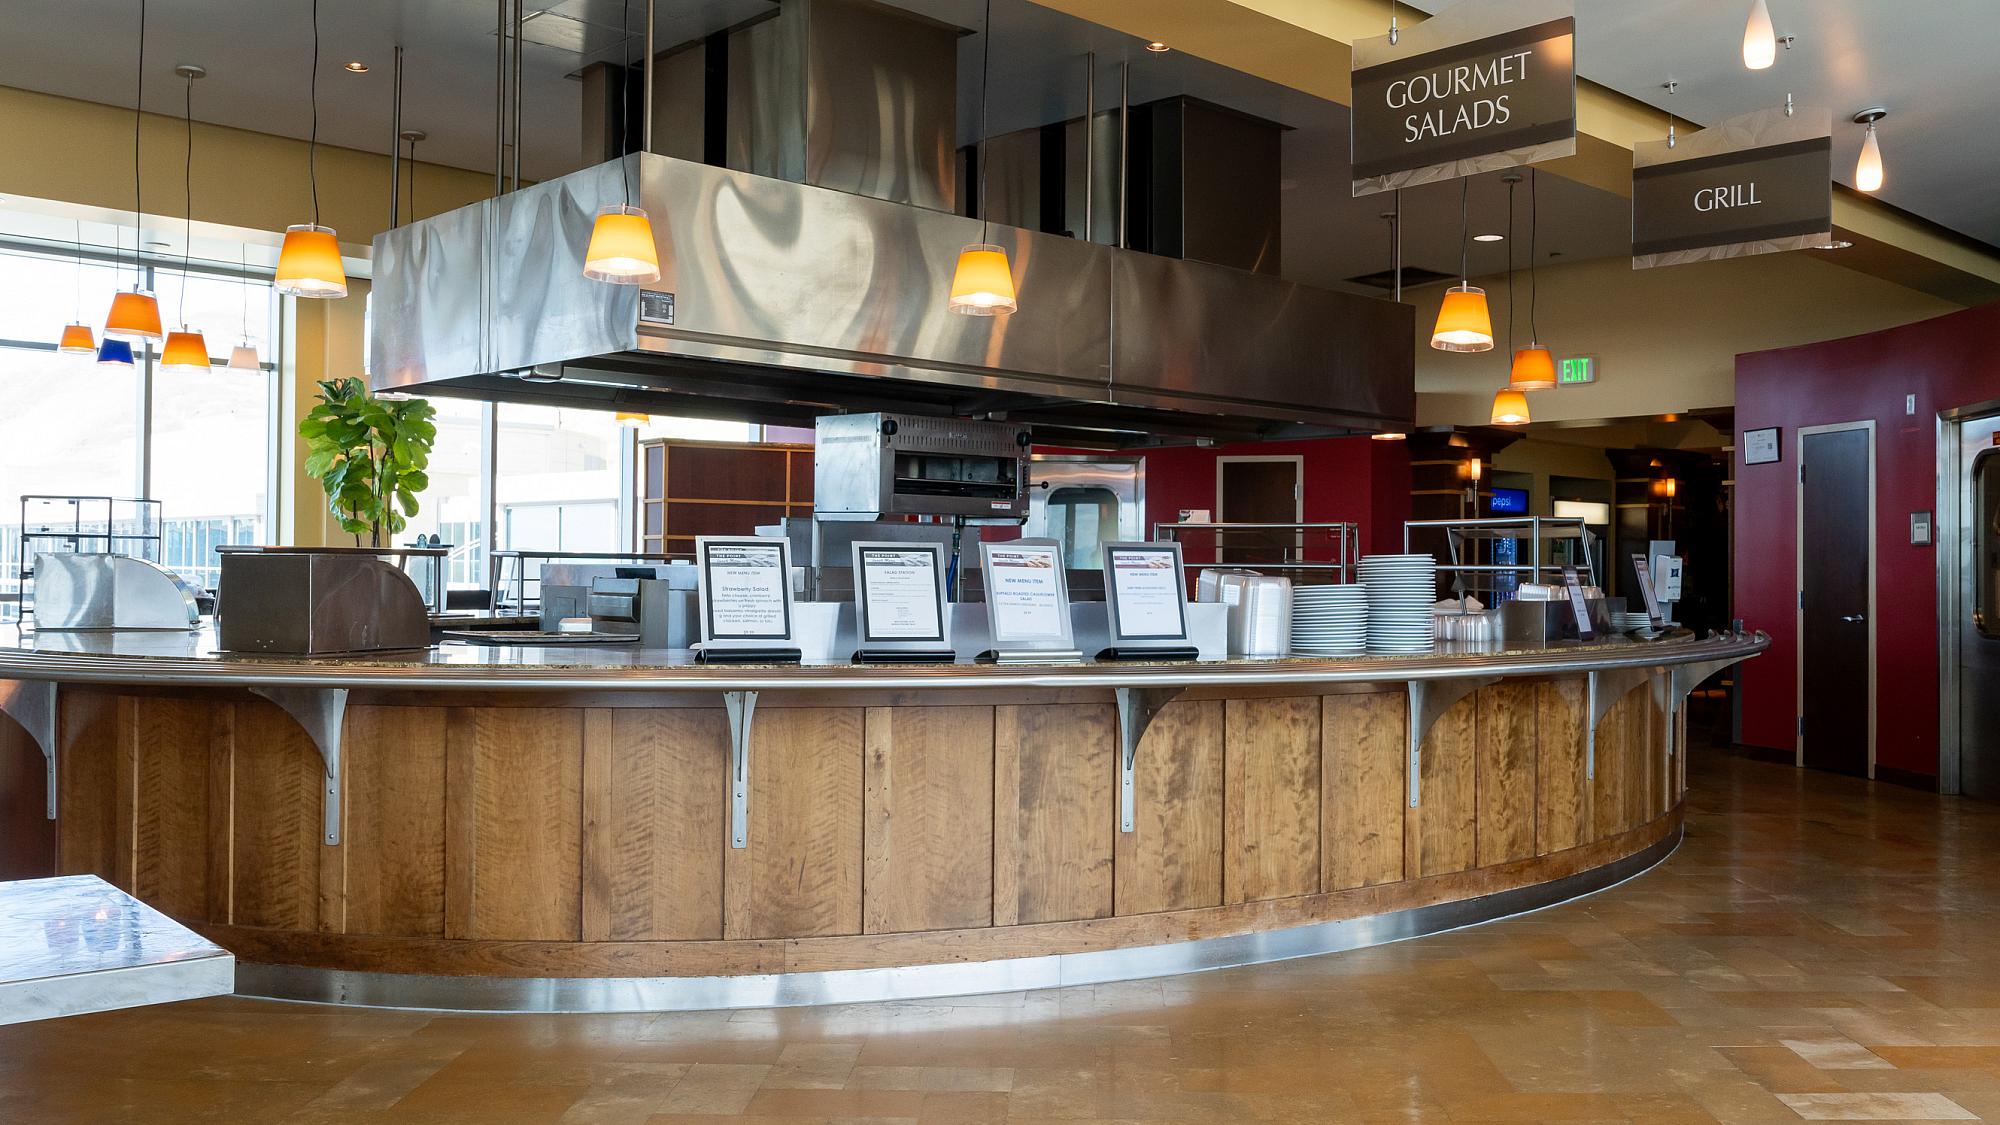 Counter where food is ordered and served in The Point